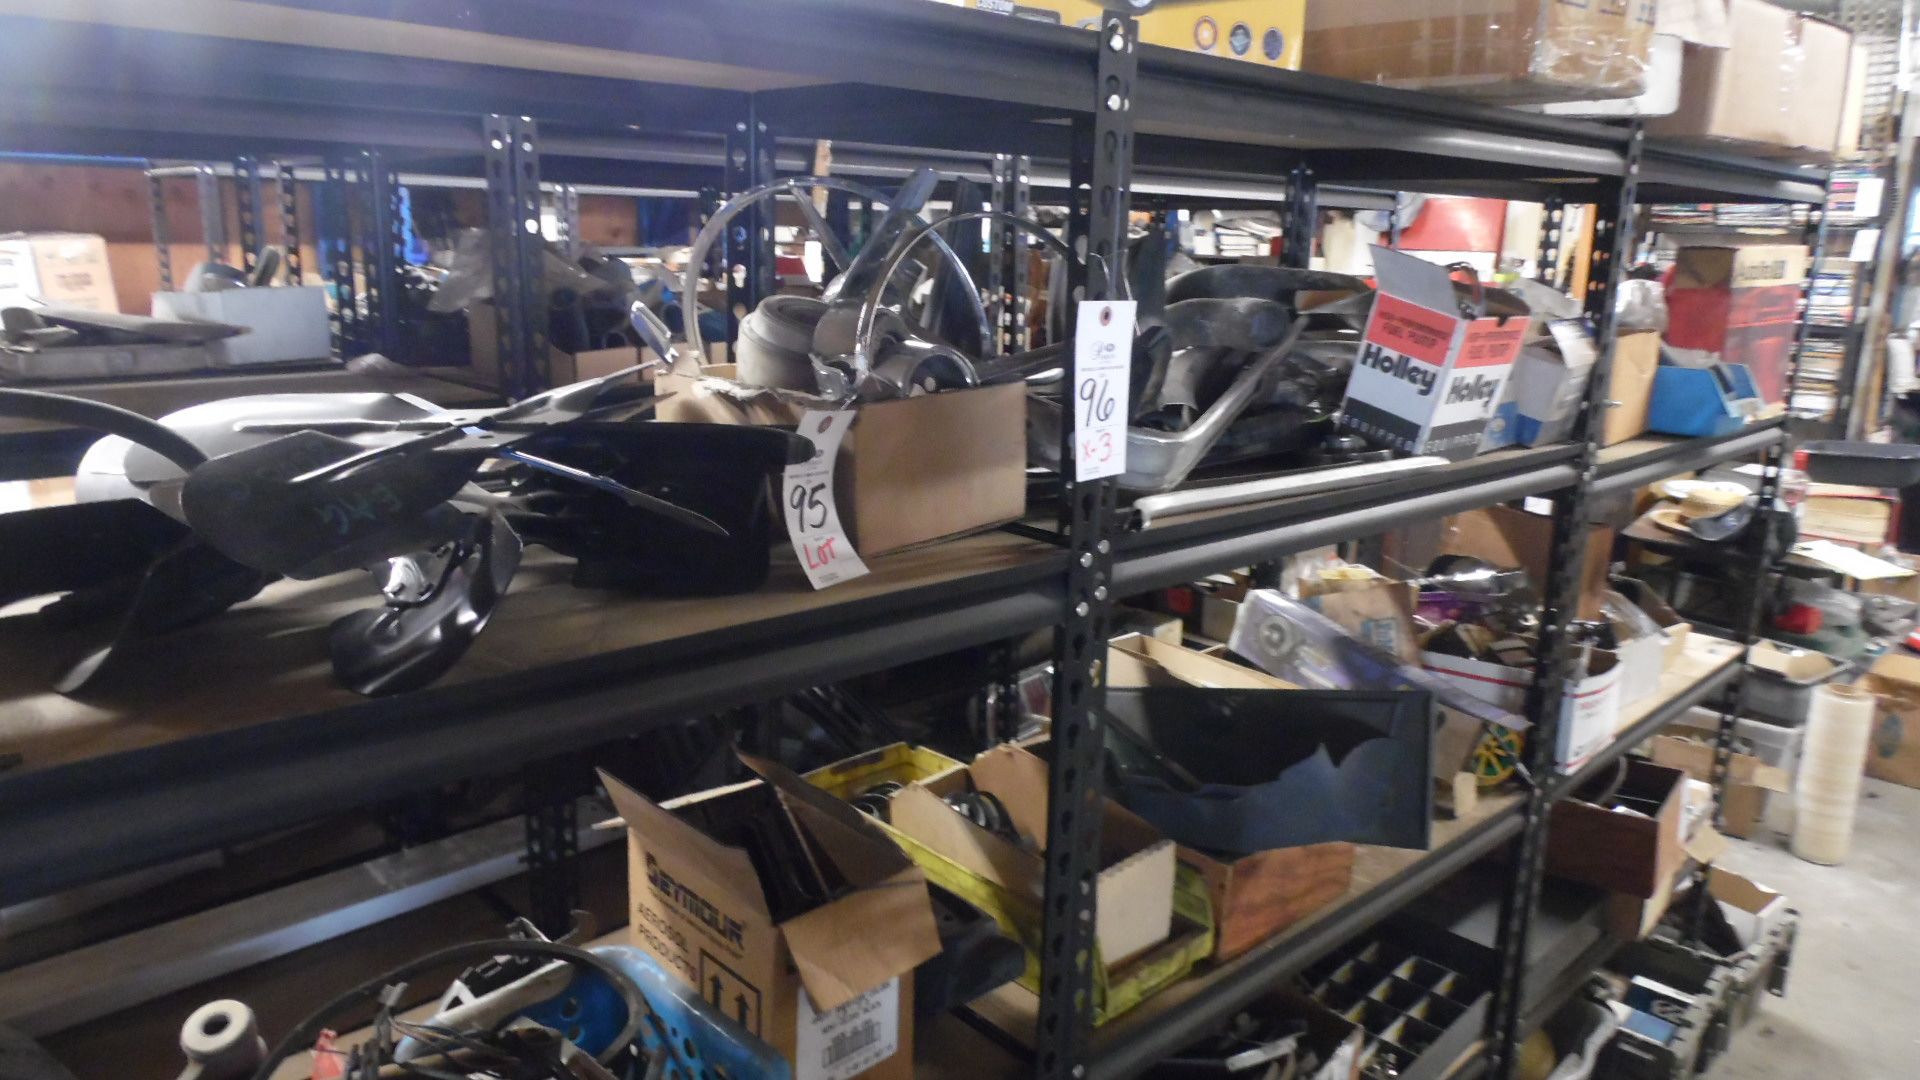 SECTIONS STOCKROOM SHELVING